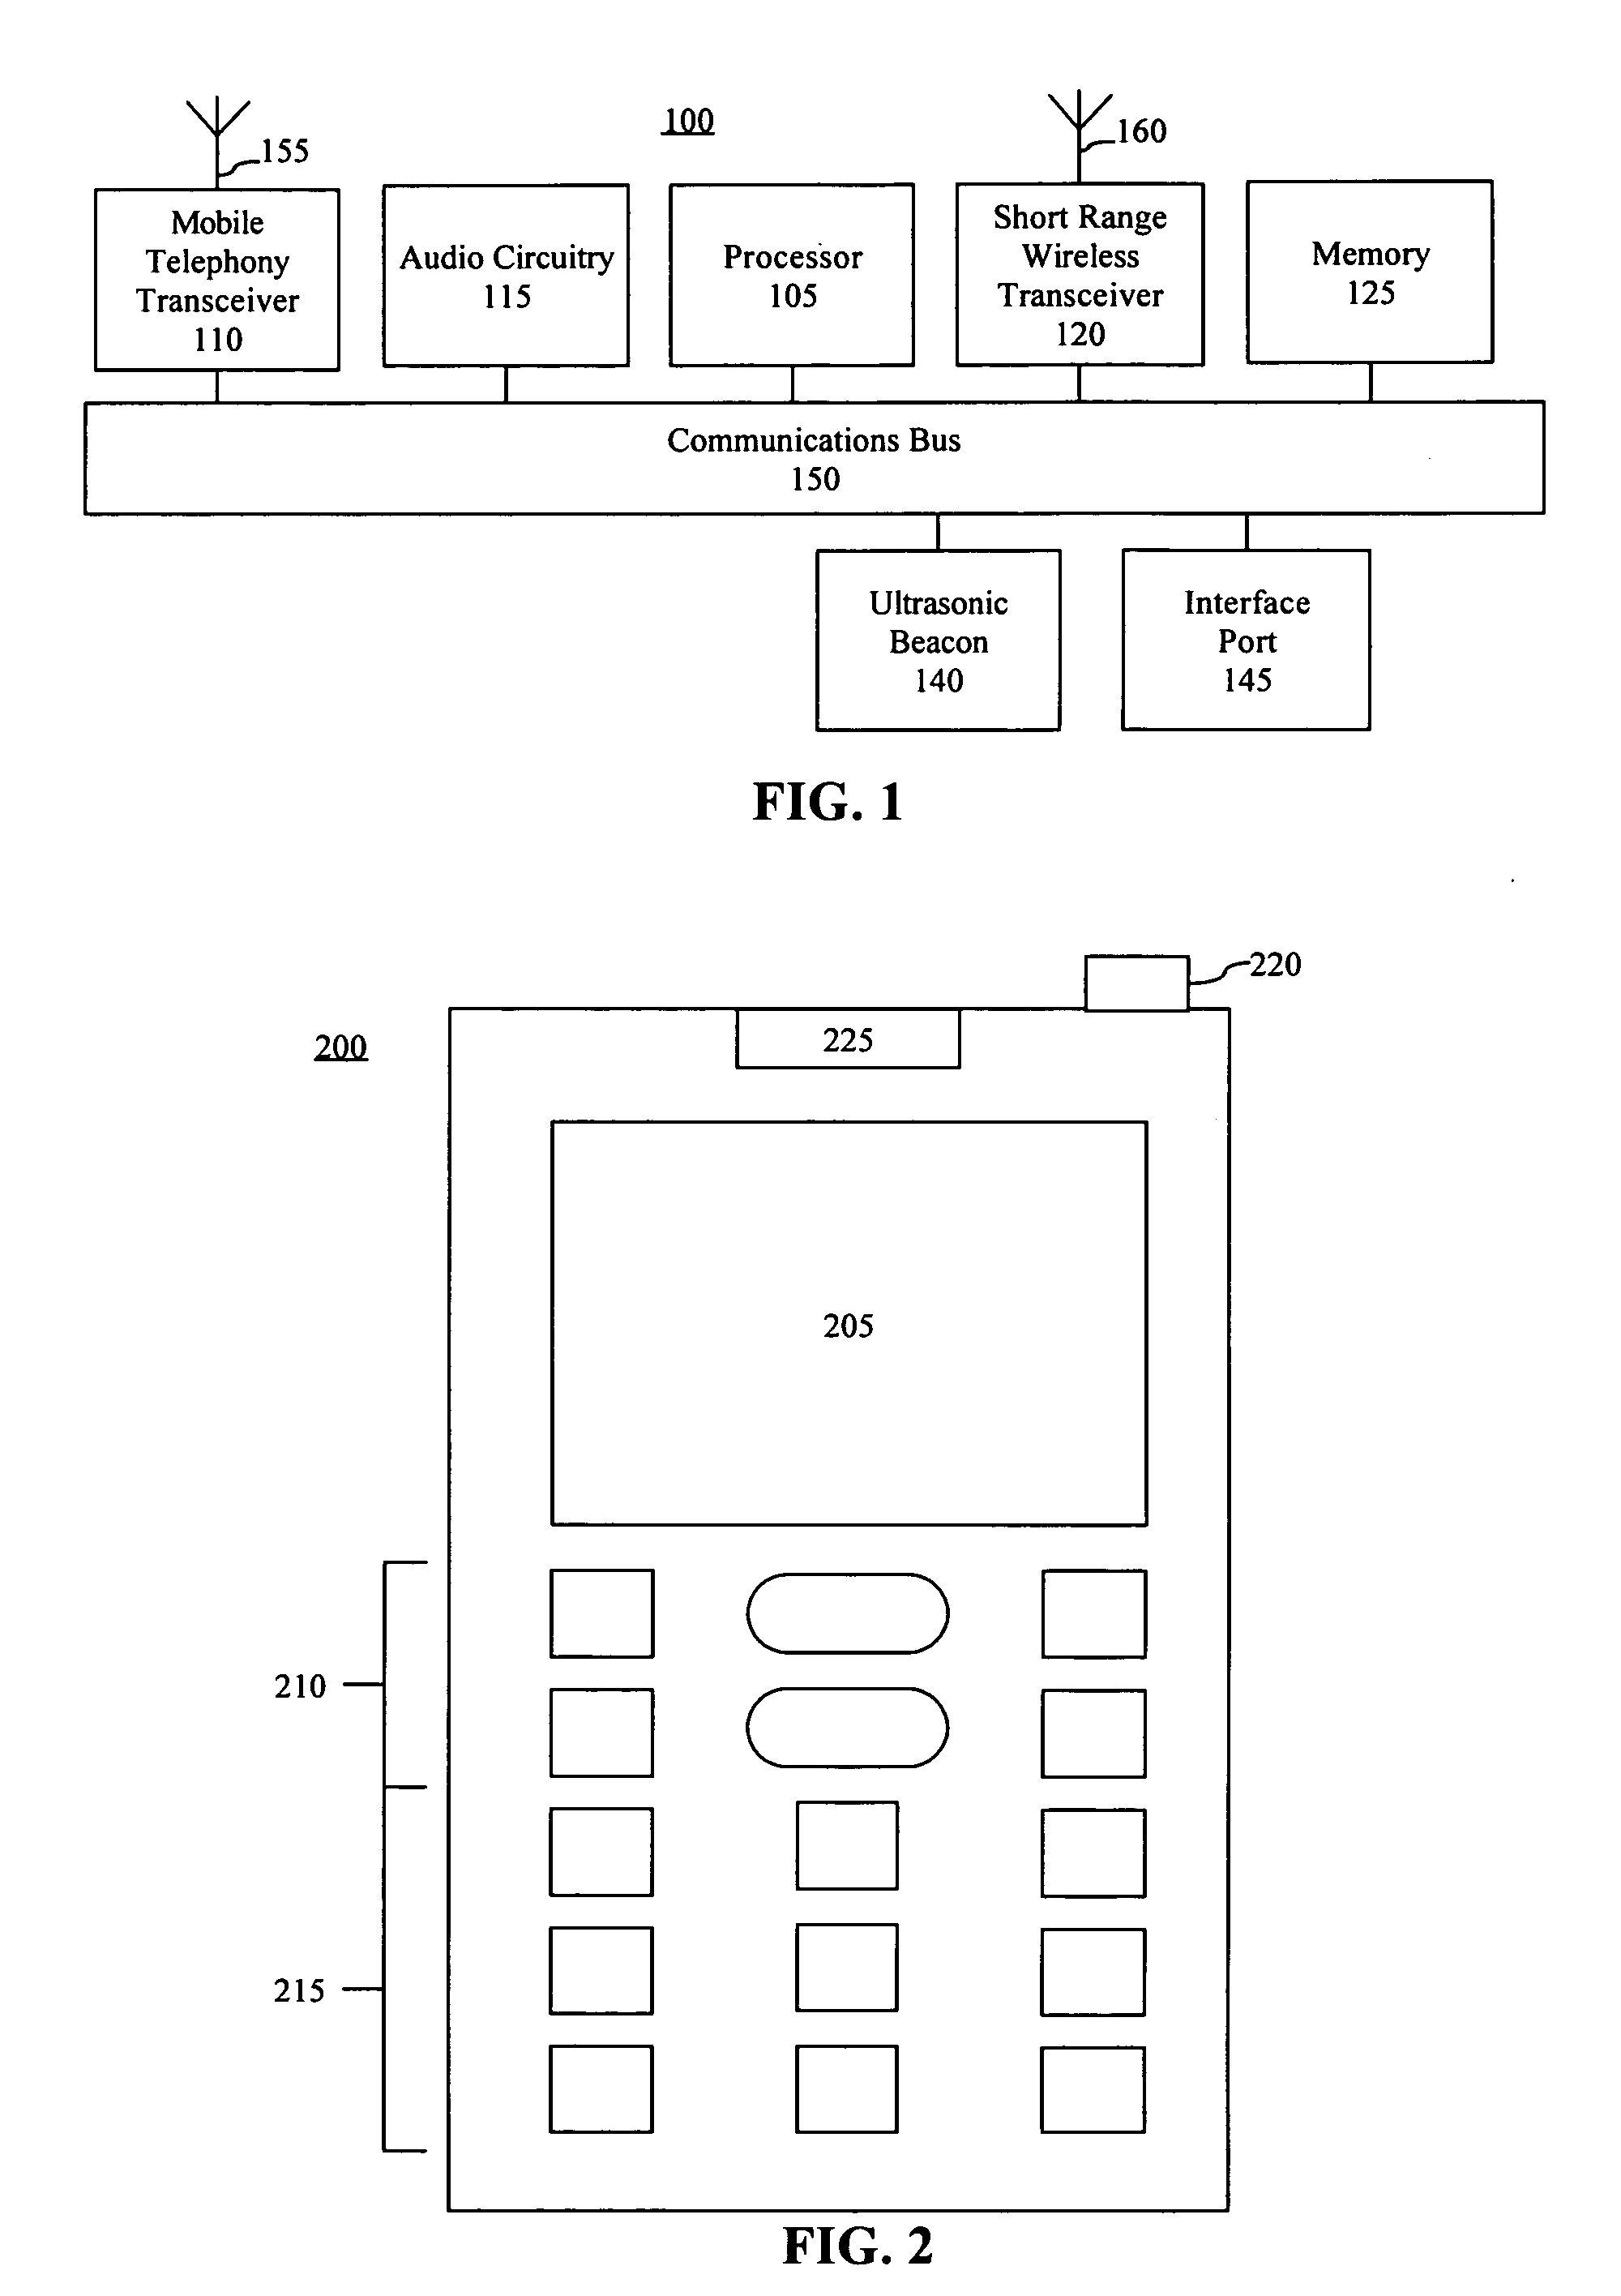 Remote surveillance and assisted care using a mobile communication device